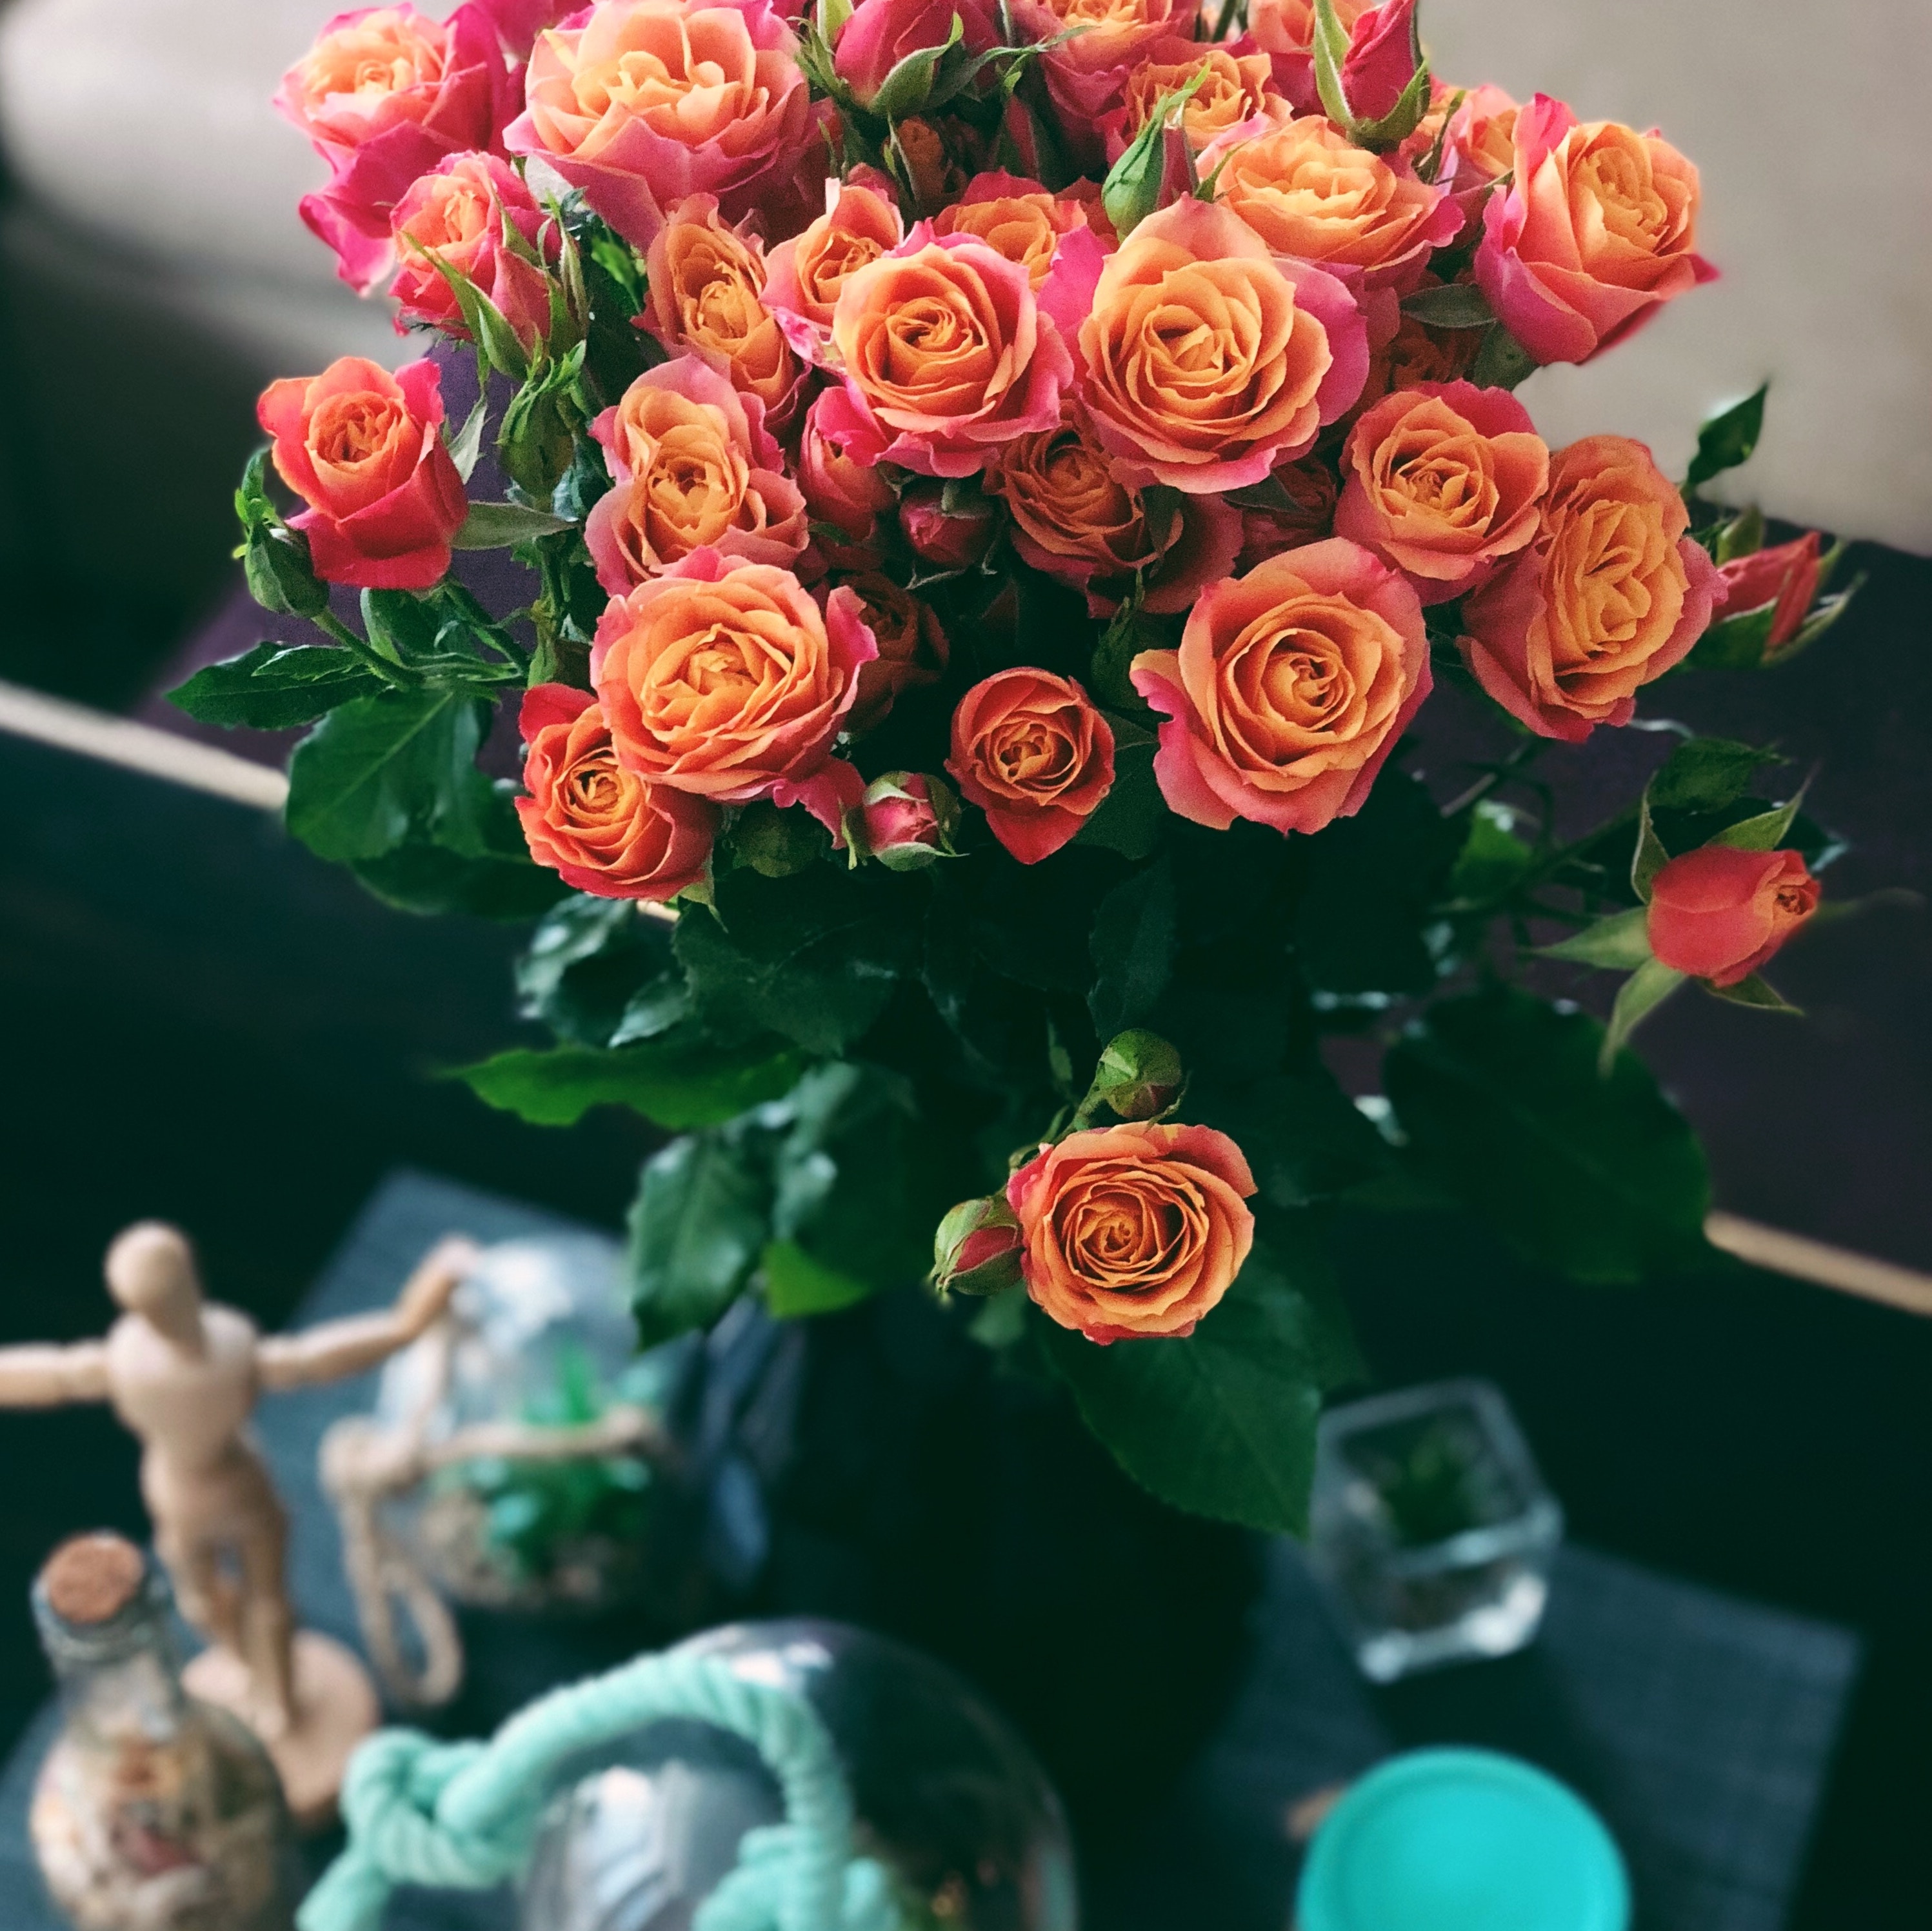 Bouquet of roses with other accoutrements on table